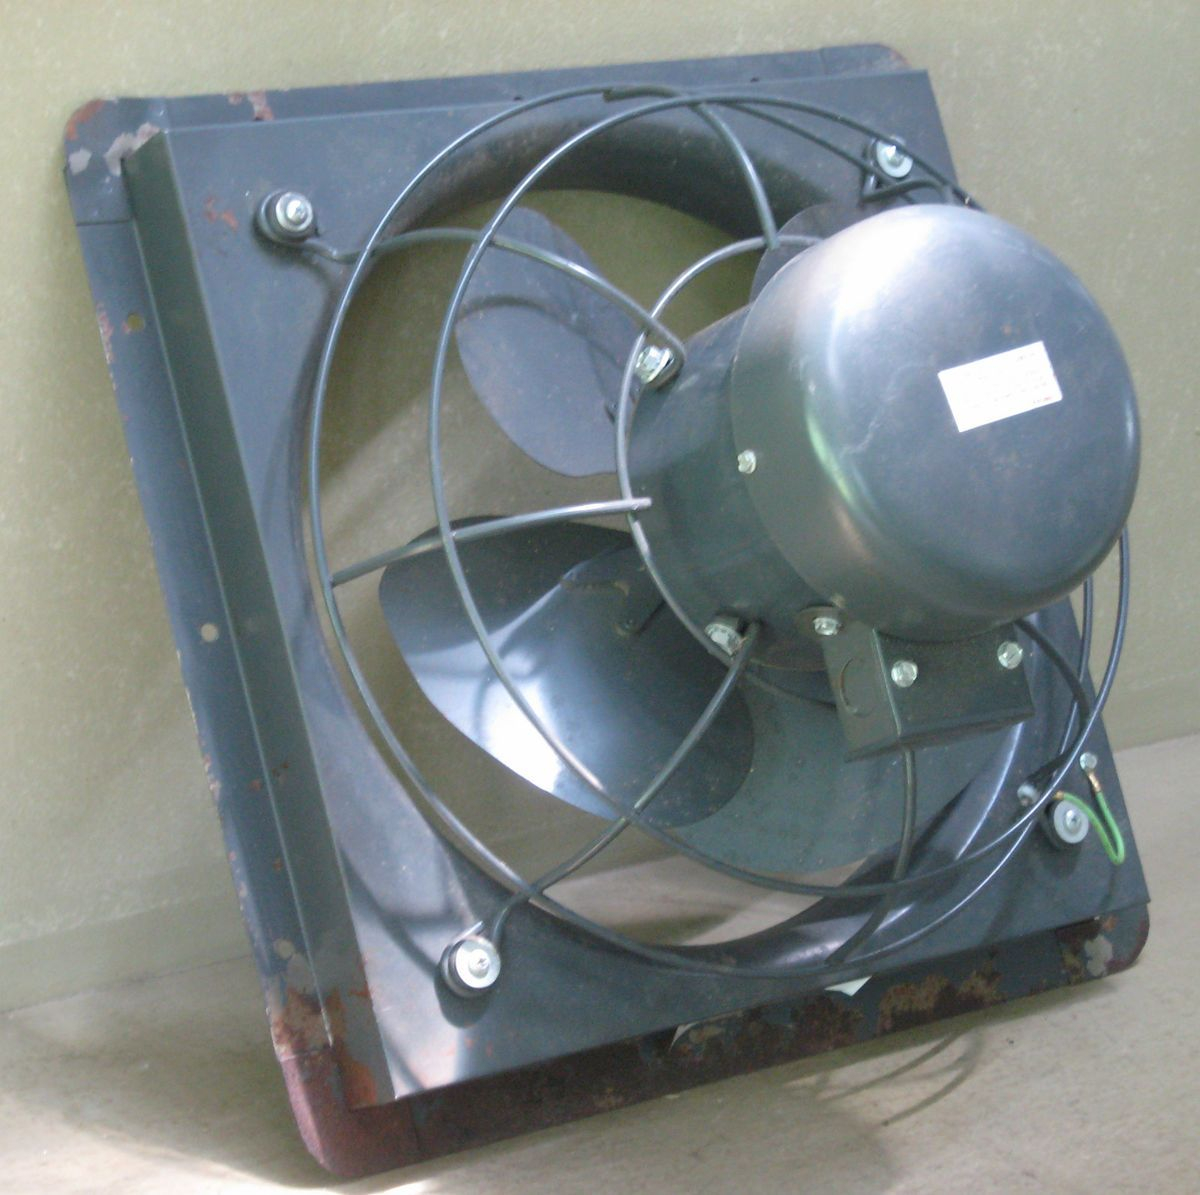 Emerson Electric Window Mount Exhaust Fan Xb 121 12 In 1 within sizing 1200 X 1195